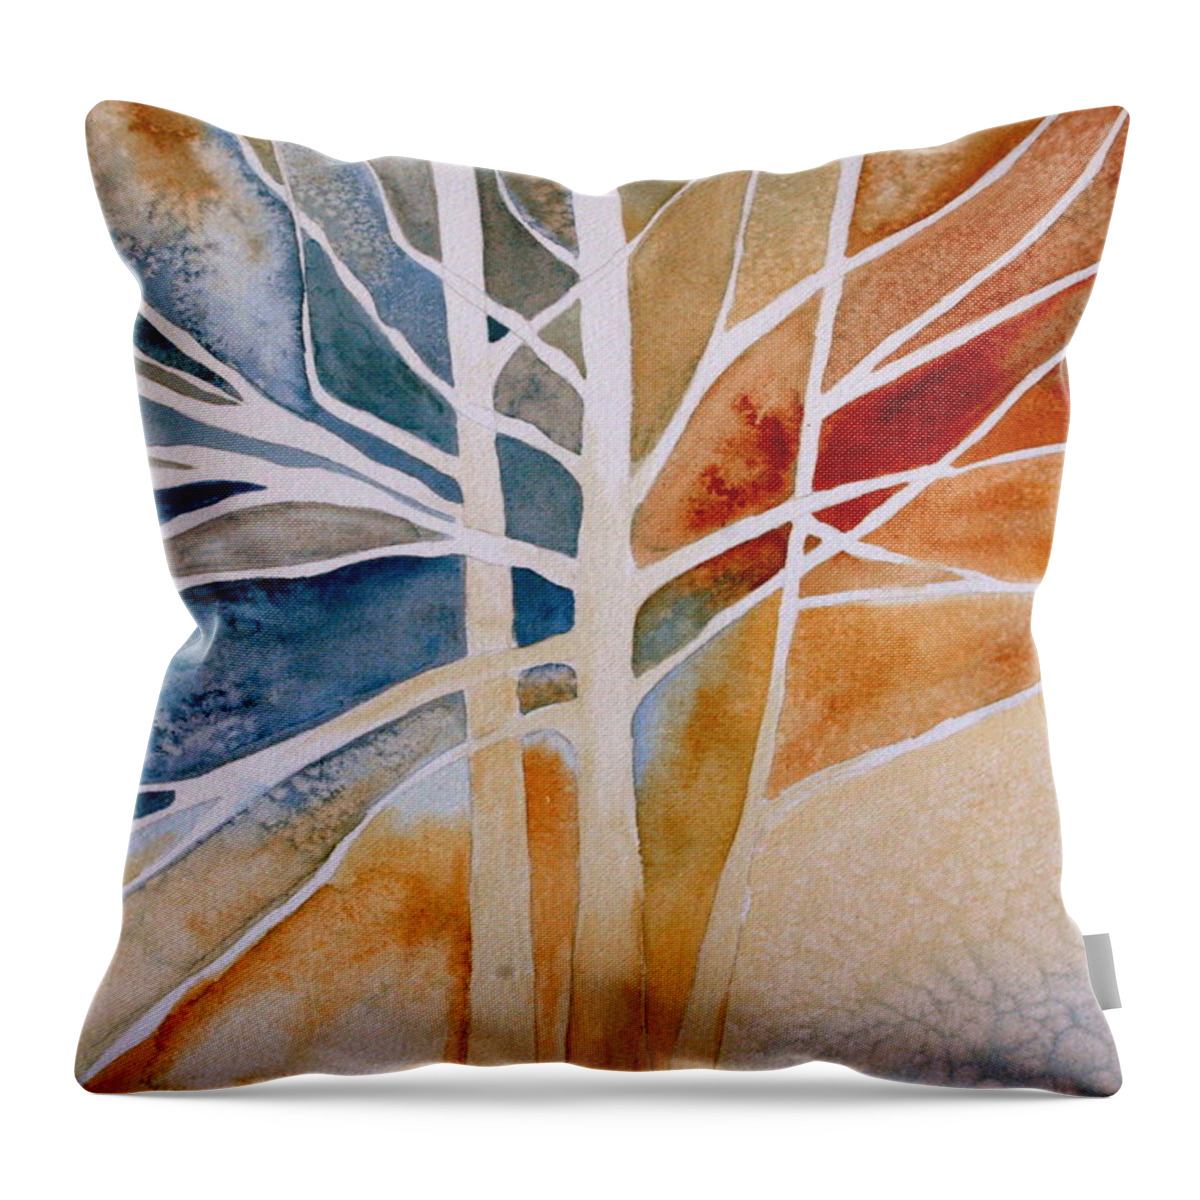 Watercolor Throw Pillow featuring the painting Lives Intertwined 2 by Julie Lueders 